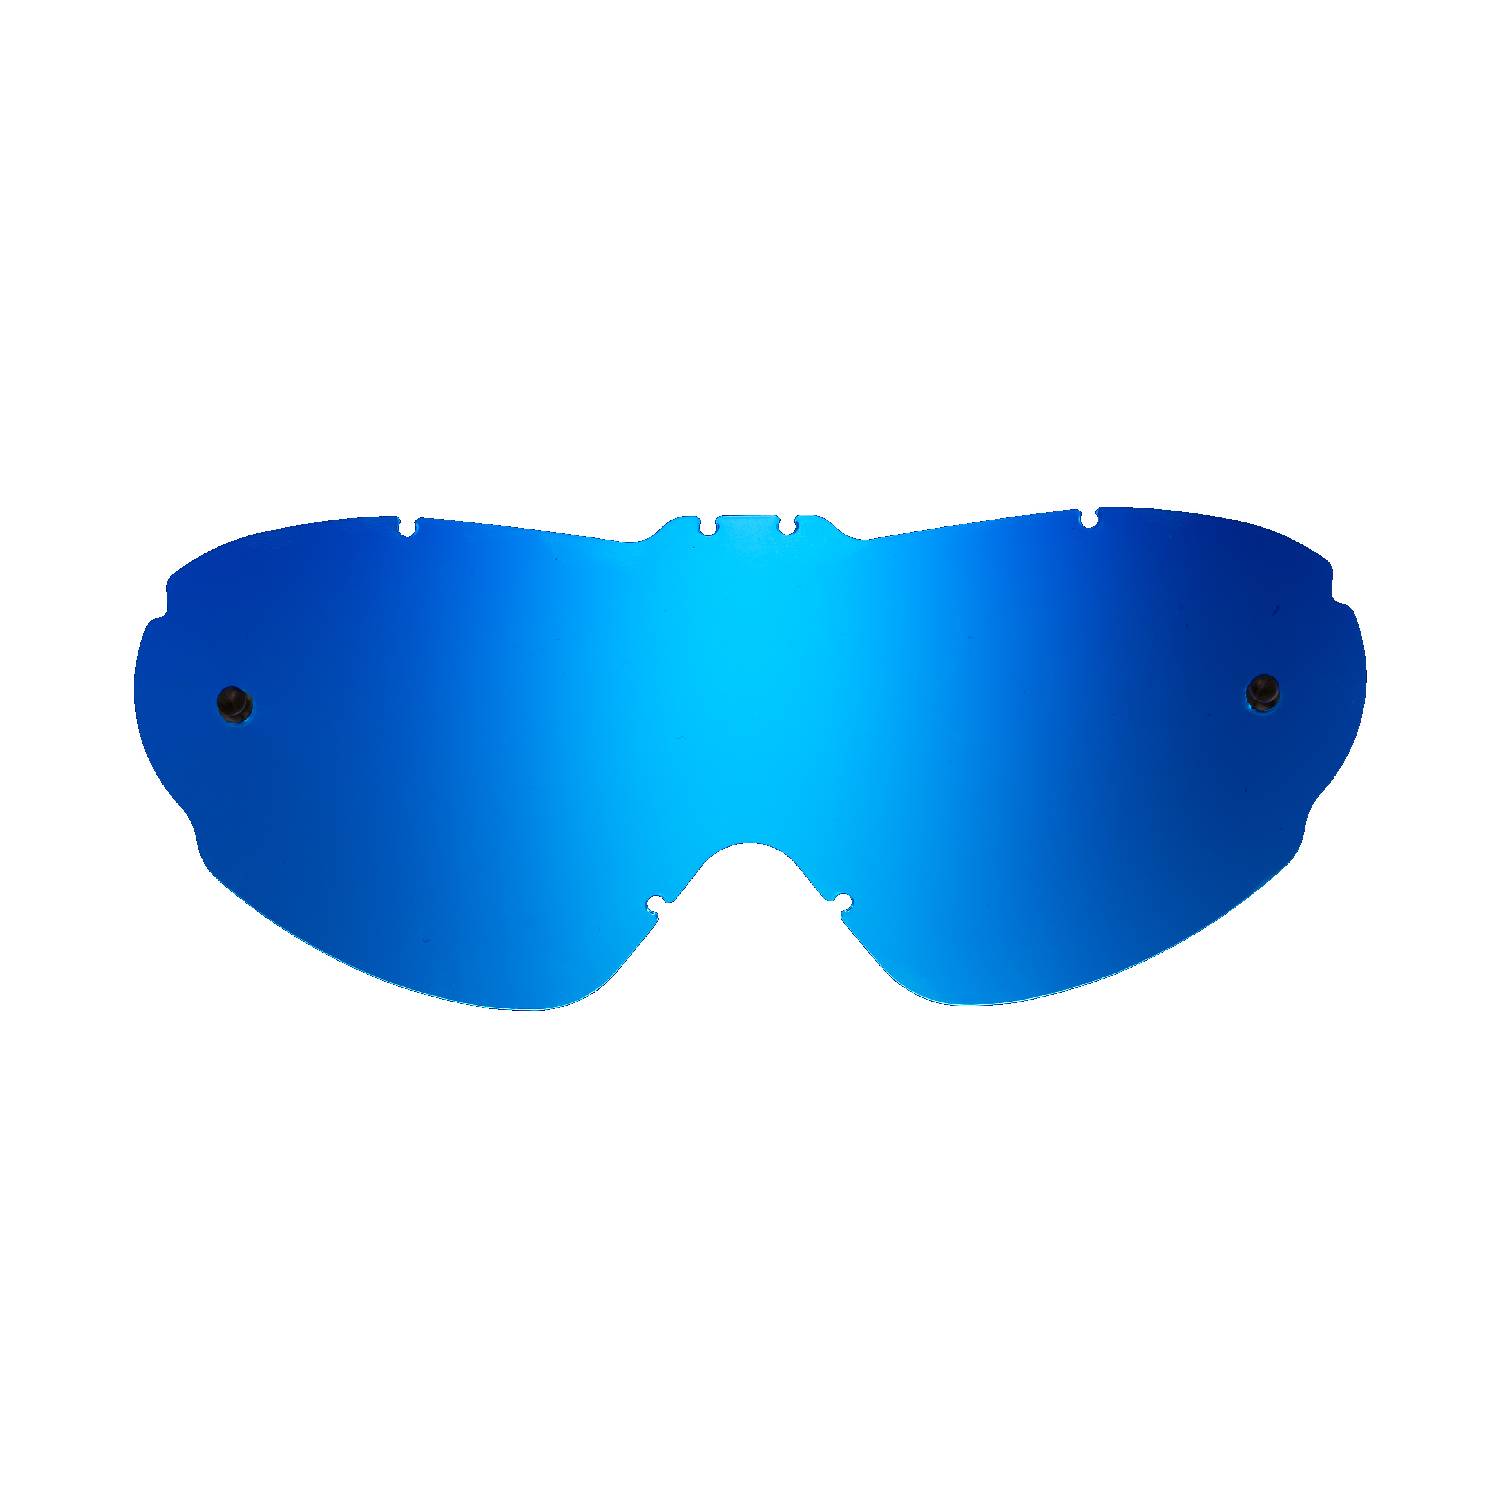 blue-toned mirrored replacement lenses for goggles compatible for Scott Hi voltage work goggle